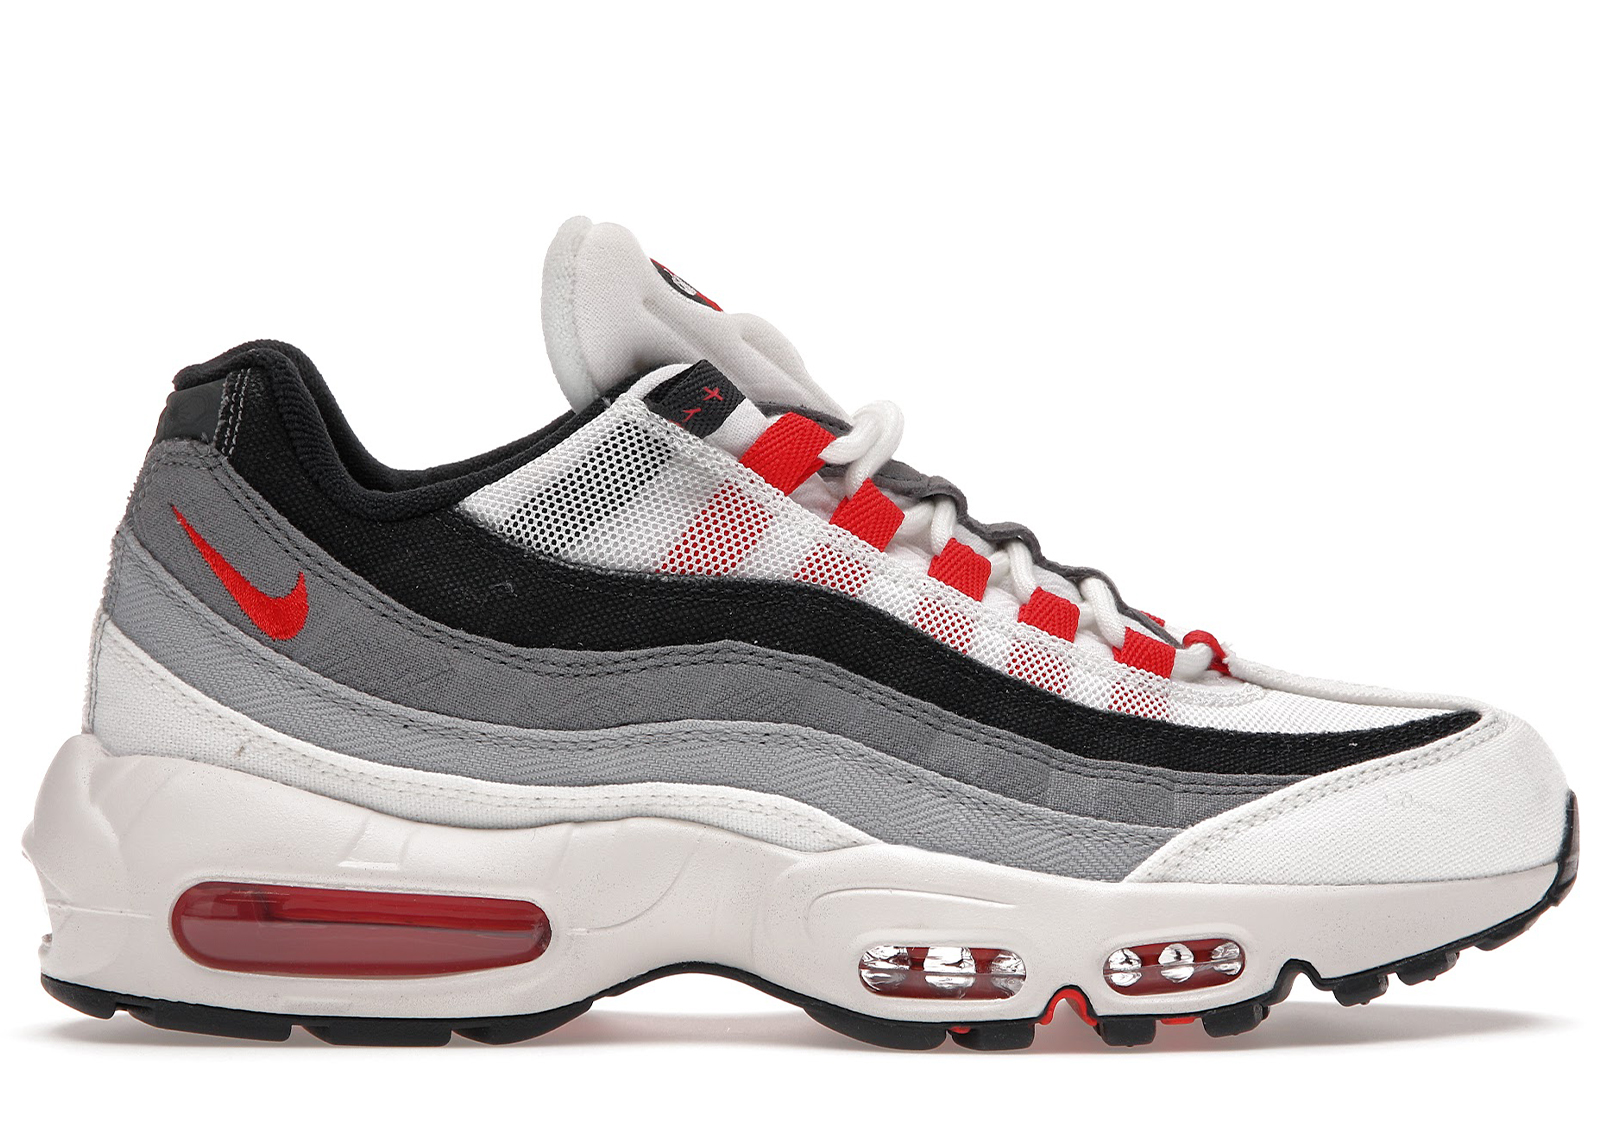 Buy Nike Air Max 95 Shoes & New Sneakers - StockX